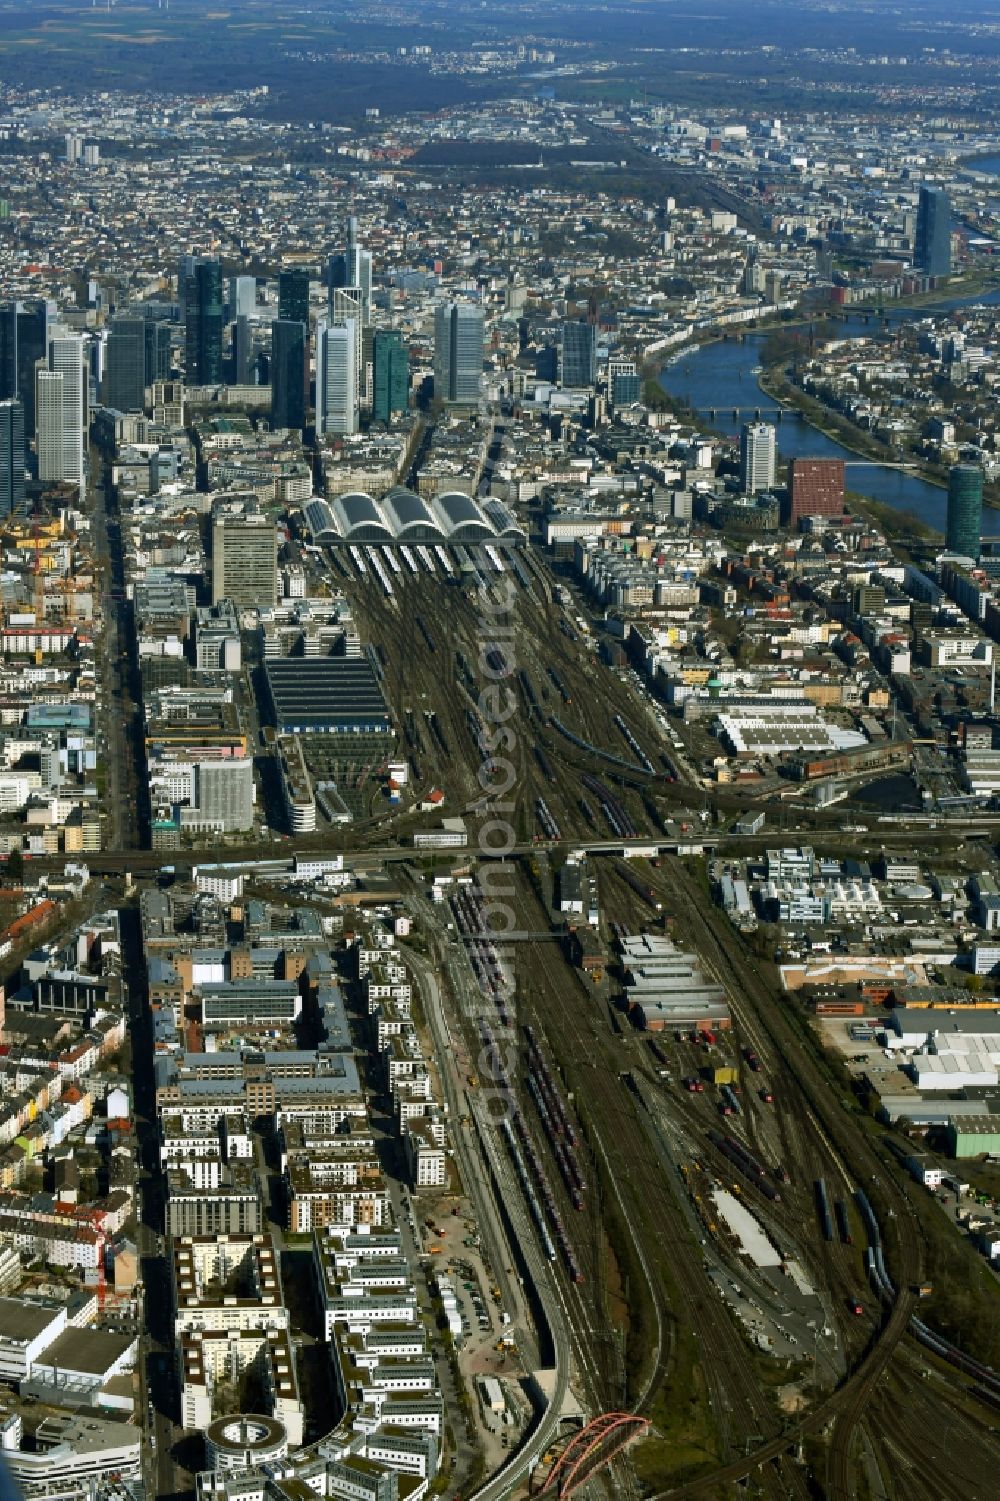 Frankfurt am Main from above - Track and building of the central station of the Deutsche Bahn in front of the high-rise tower skyline in Frankfurt am Main in the state of Hesse